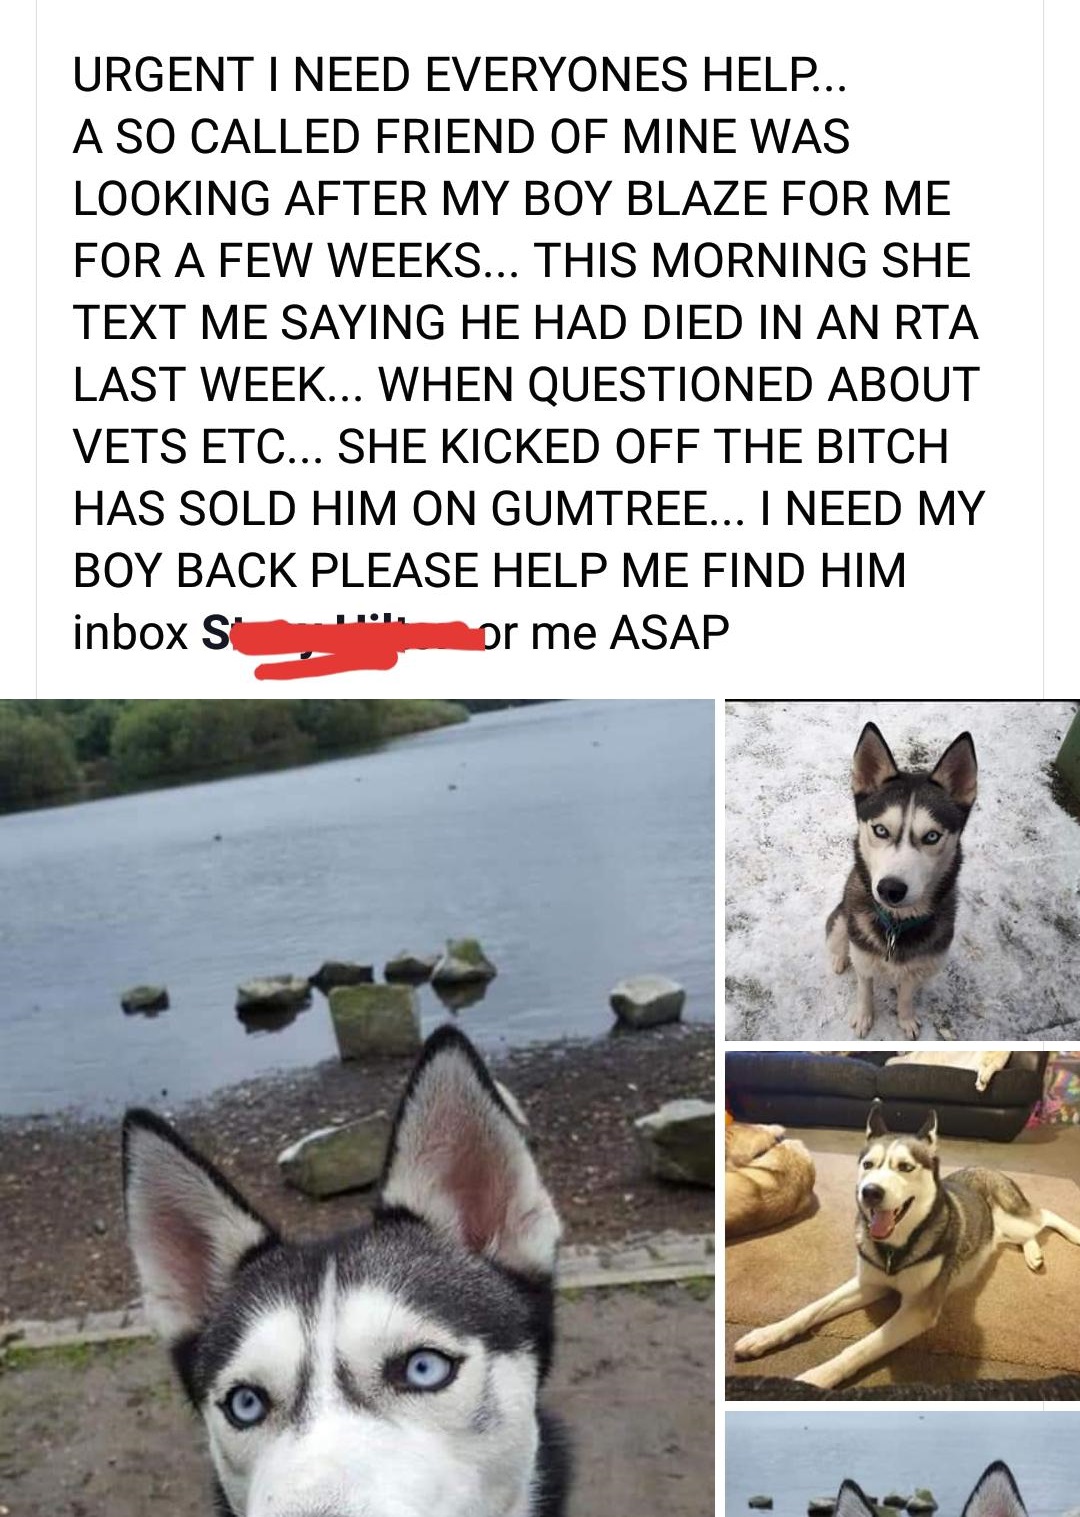 siberian husky - Urgent I Need Everyones Help... A So Called Friend Of Mine Was Looking After My Boy Blaze For Me For A Few Weeks... This Morning She Text Me Saying He Had Died In An Rta Last Week... When Questioned About Vets Etc... She Kicked Off The Bi